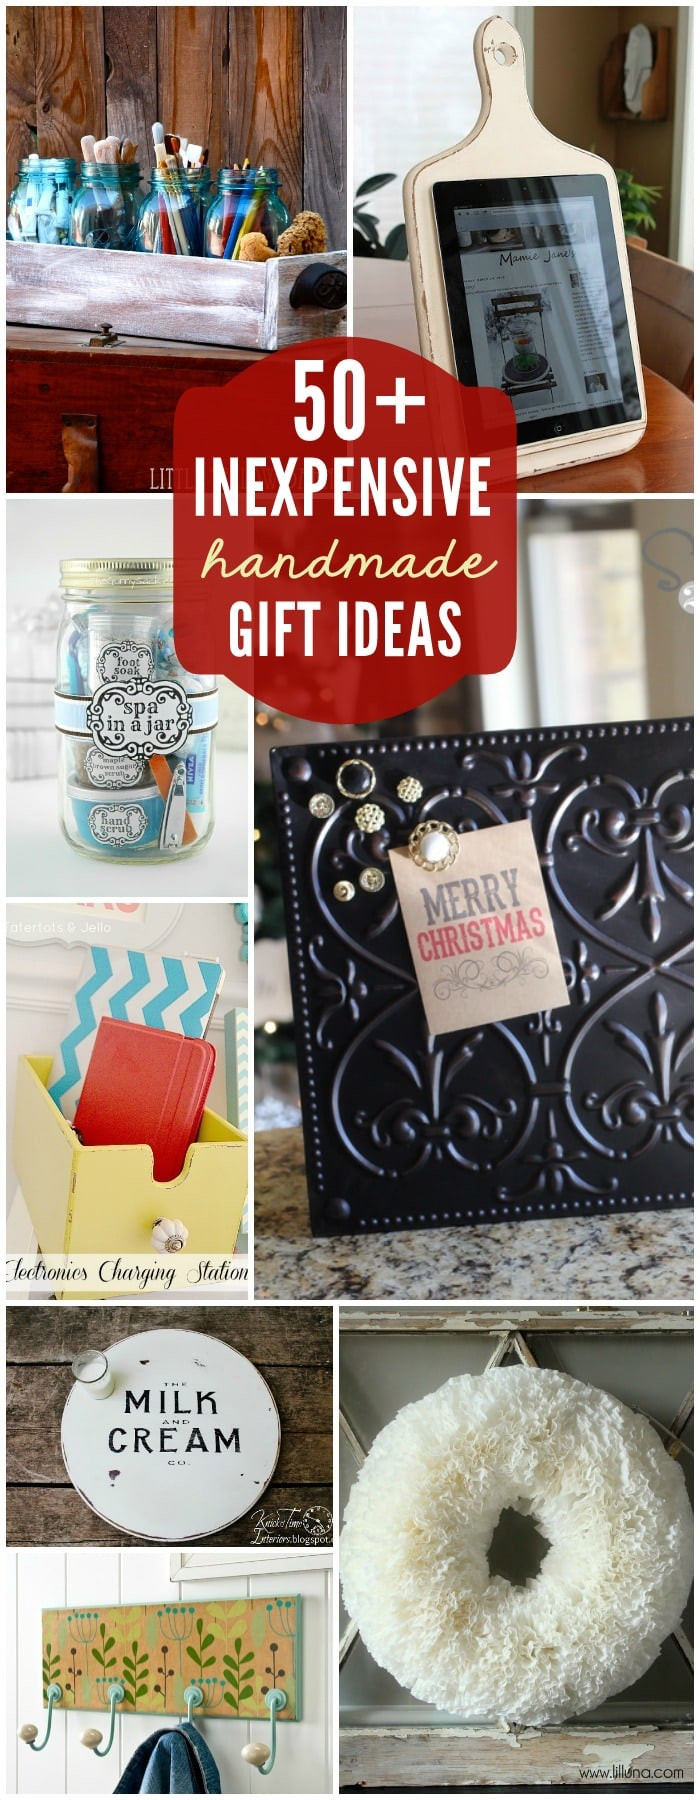 Great Holiday Gift Ideas
 Easy DIY Gift Ideas